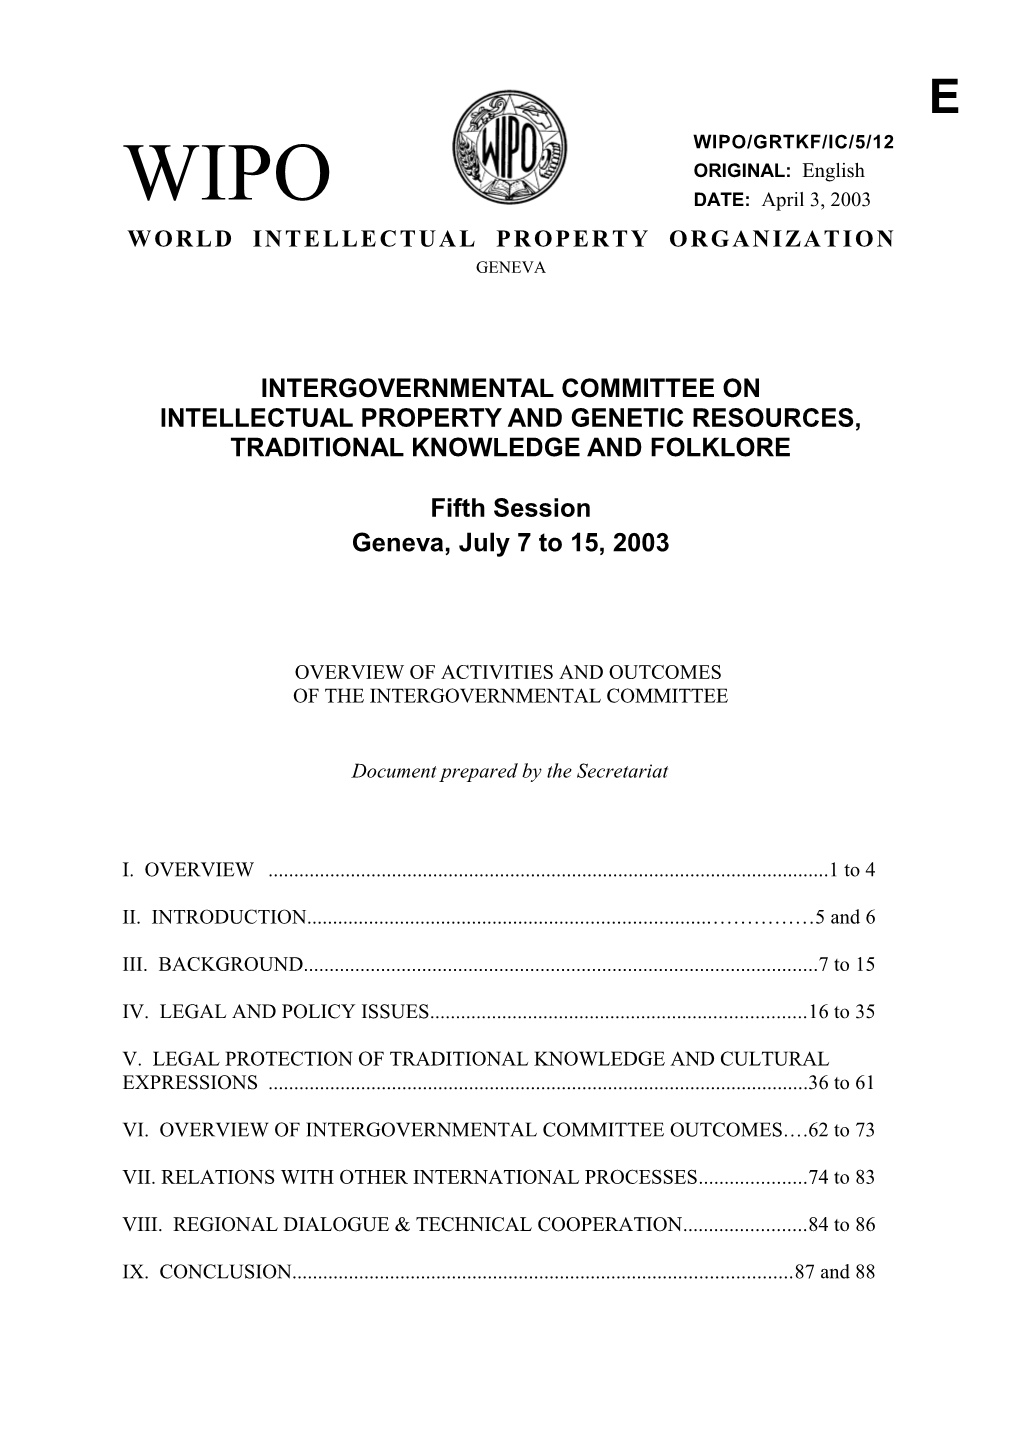 WIPO/GRTKF/IC/5/12: Overview of Activities and Outcomes of the Intergovernmental Committee